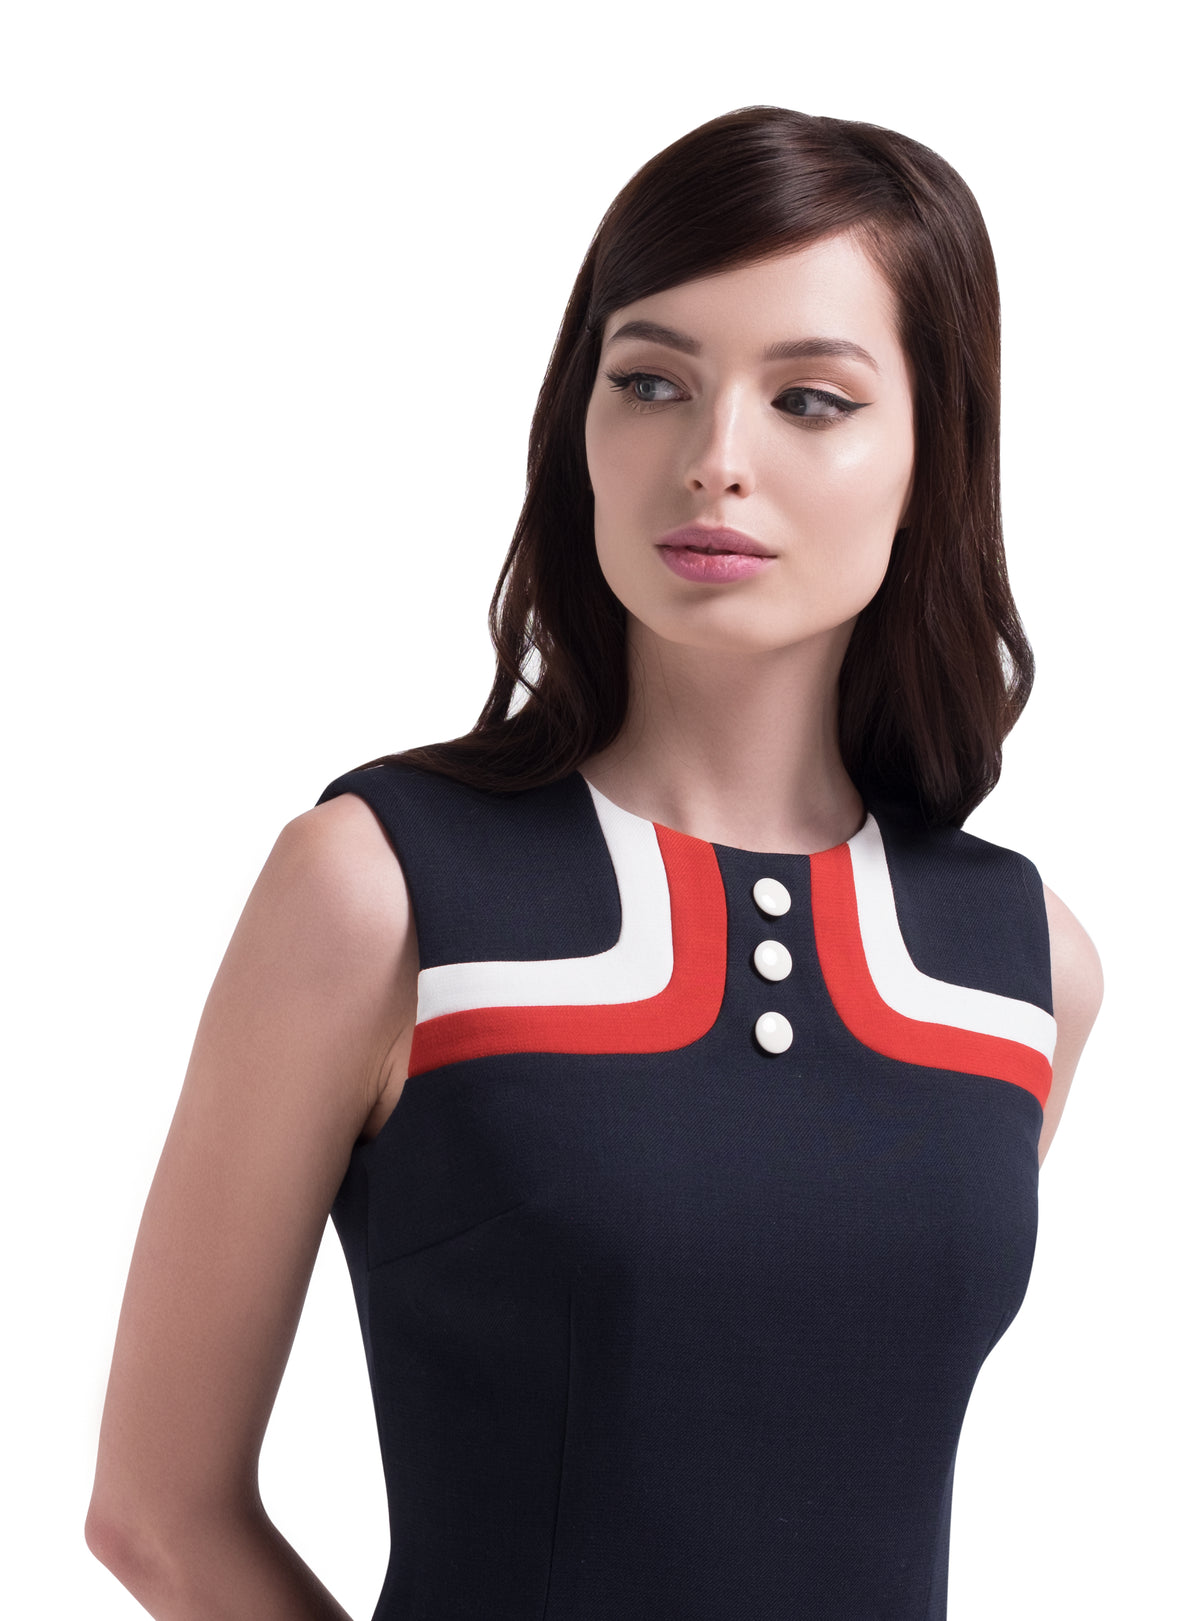 This straight cut mod style sleeveless dress has distinguished tricolour bodice detailing, three neckline buttons and a thick light cream coloured waistline belt. Italian fabric, fully lined. A versatile wardrobe addition for at-work or play. Pairs perfectly with our matching coat to complete a casual but impacting look.  Choose bespoke for short, capped or medium length sleeves.